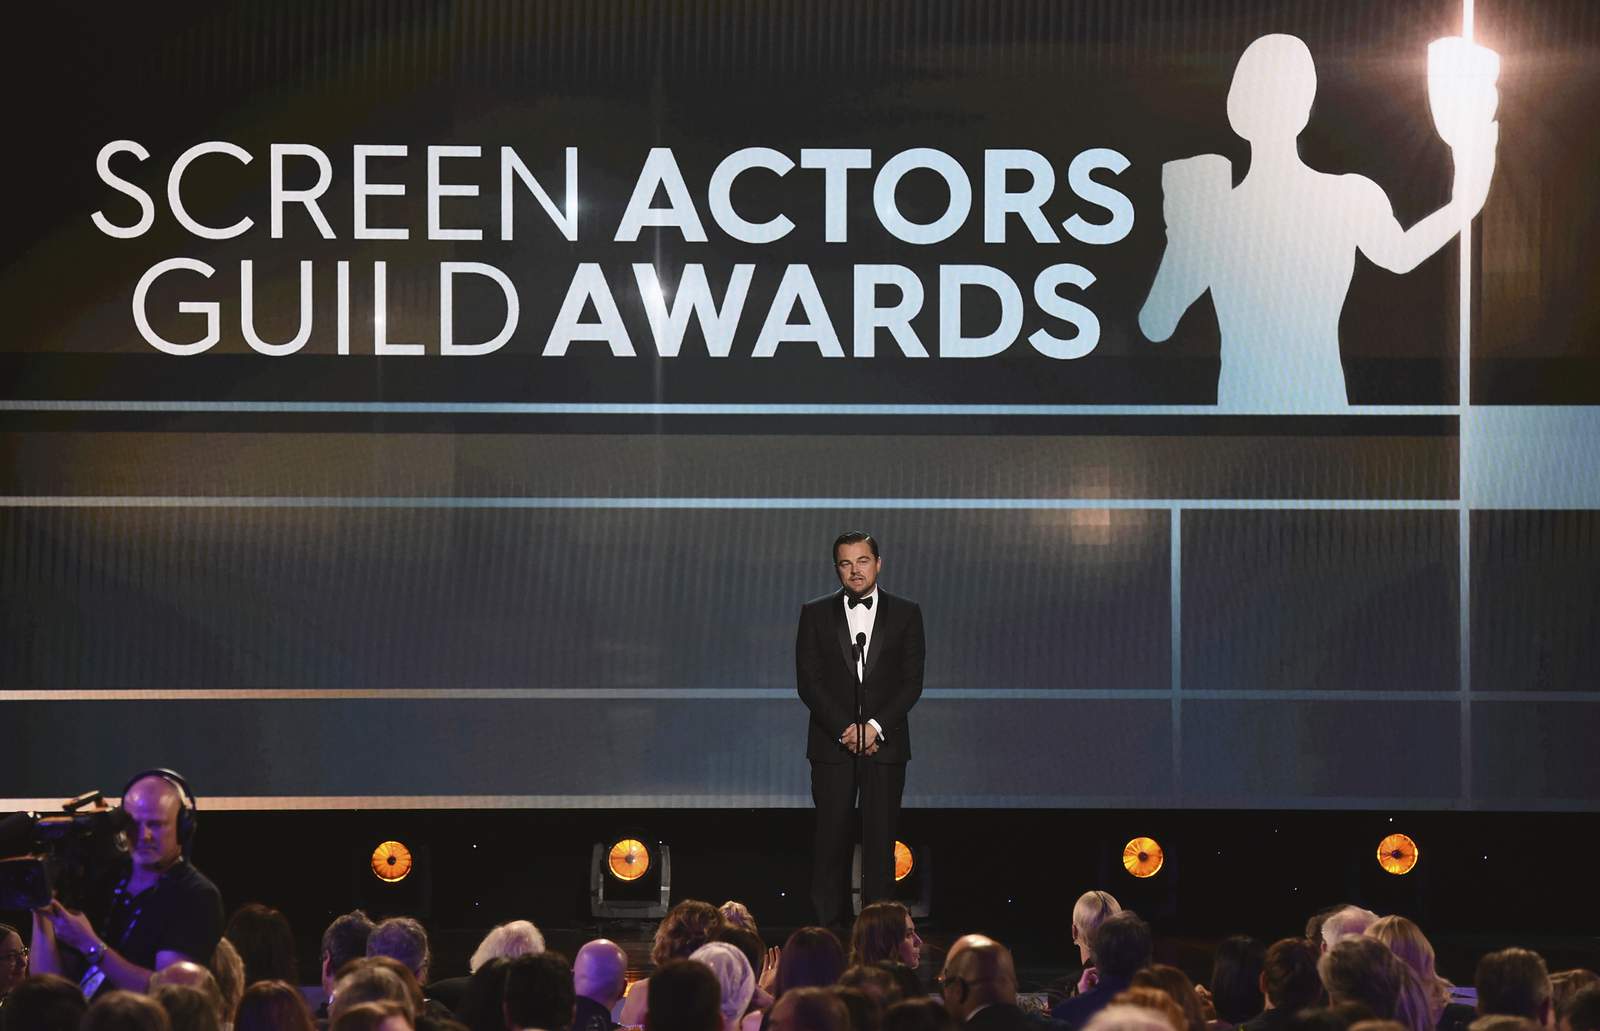 SAG Awards moves air date to avoid conflict with Grammys